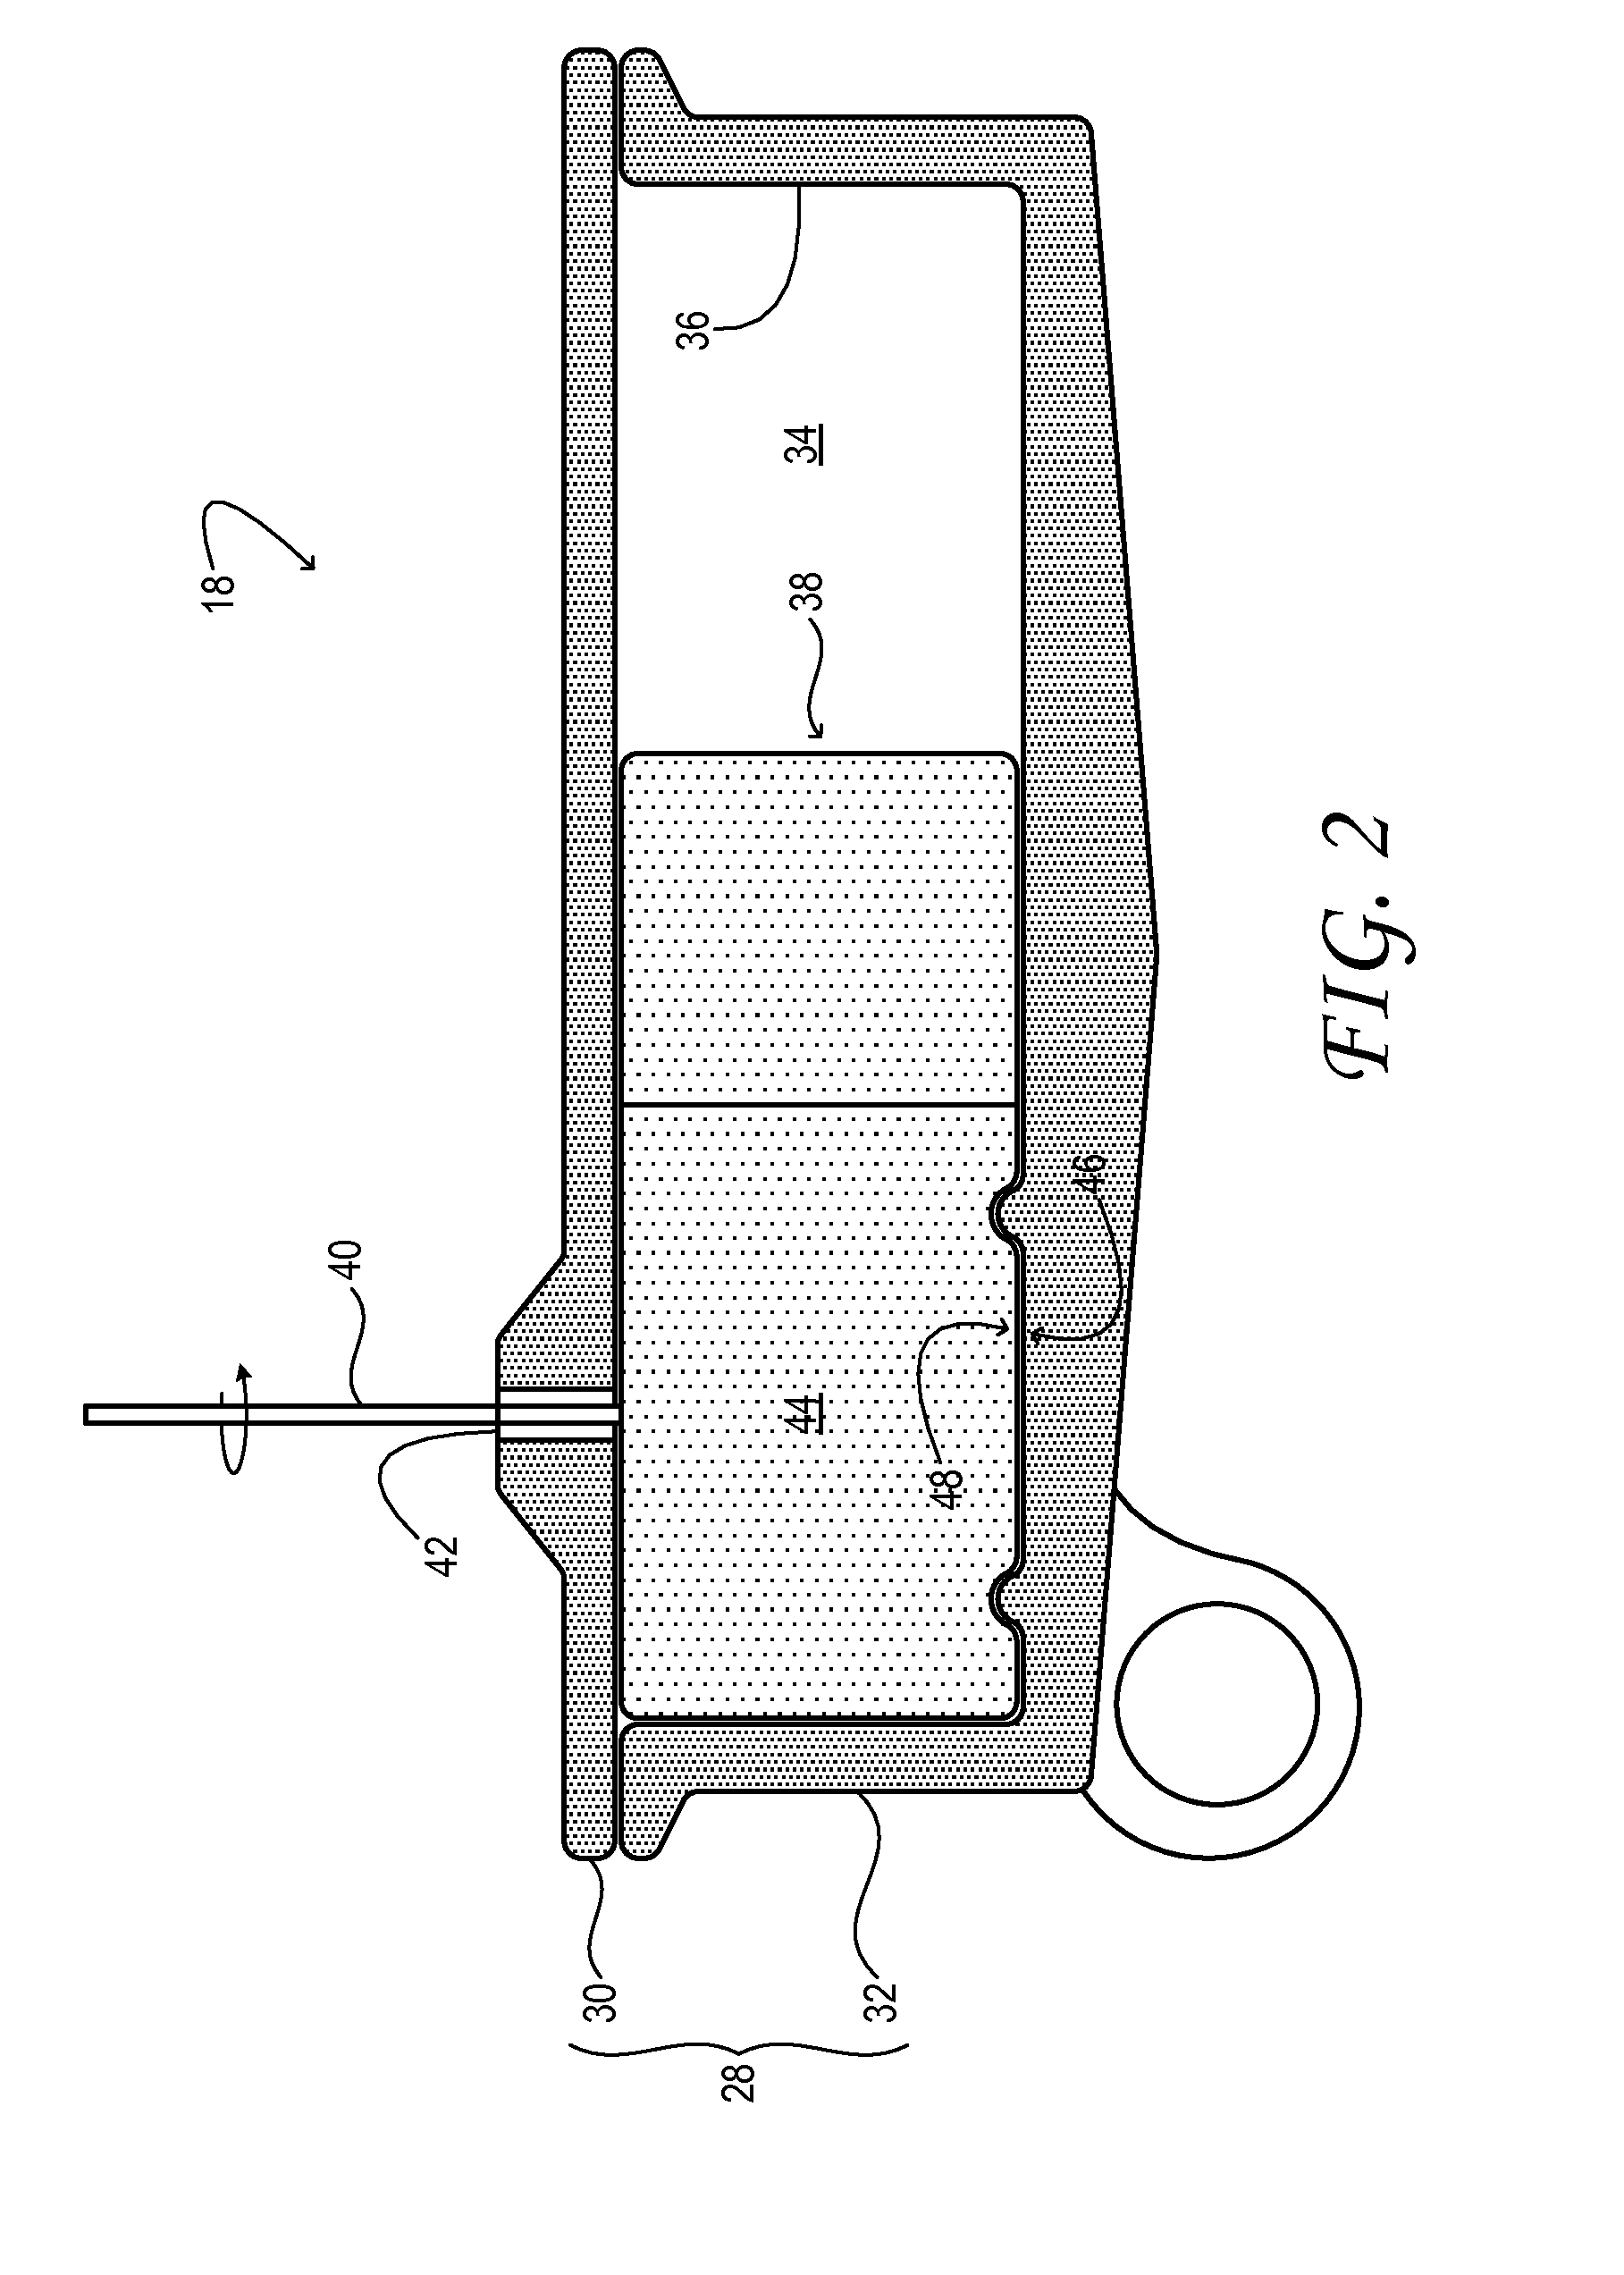 Vacuum pump with rotor-stator positioning to provide non-return